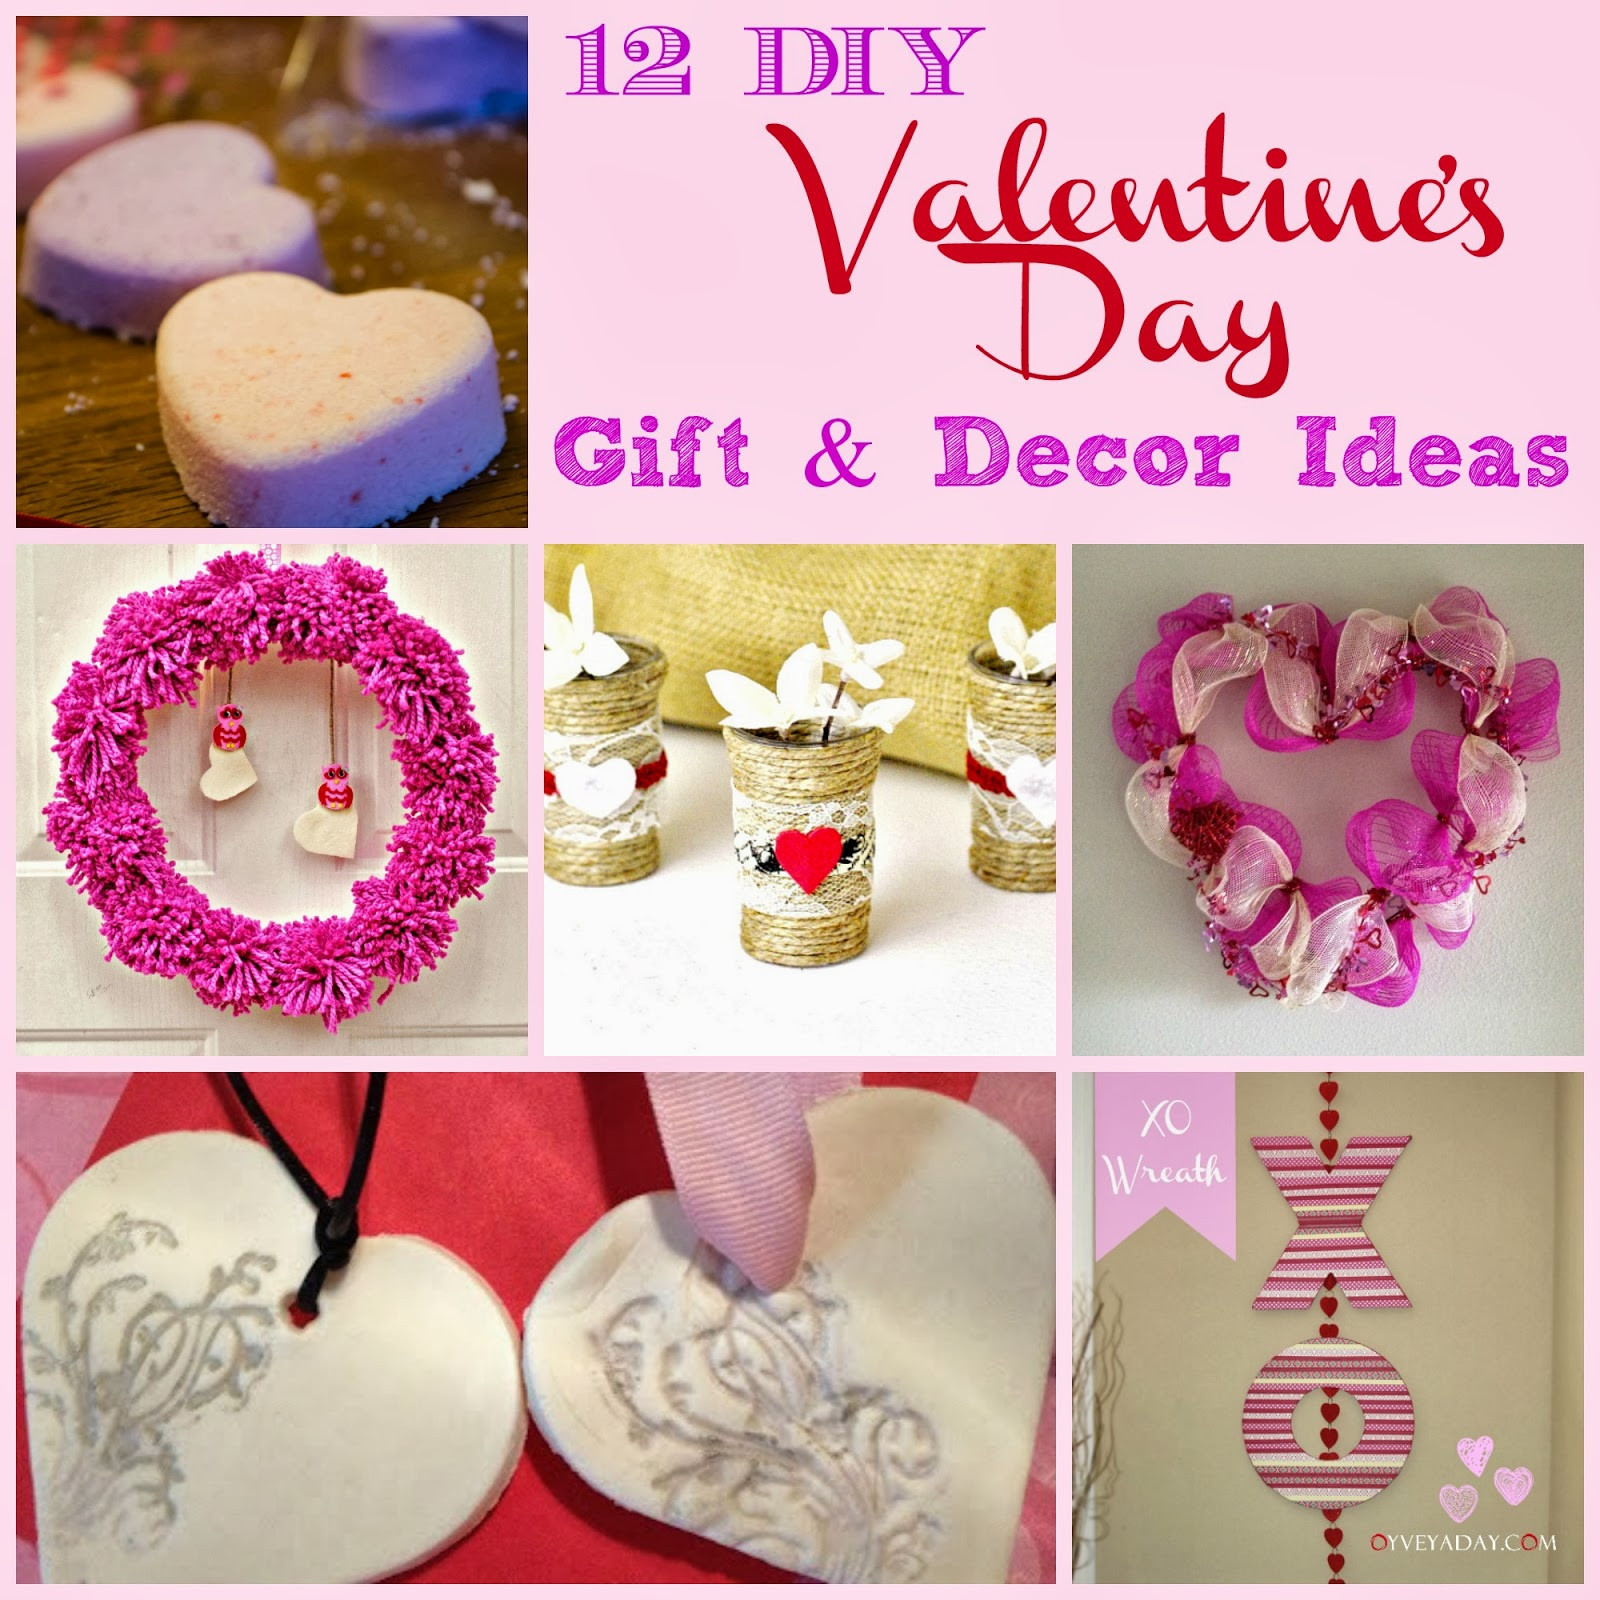 Valentines Day Diy Lovely 12 Diy Valentine S Day Gift &amp; Decor Ideas Outnumbered 3 to 1